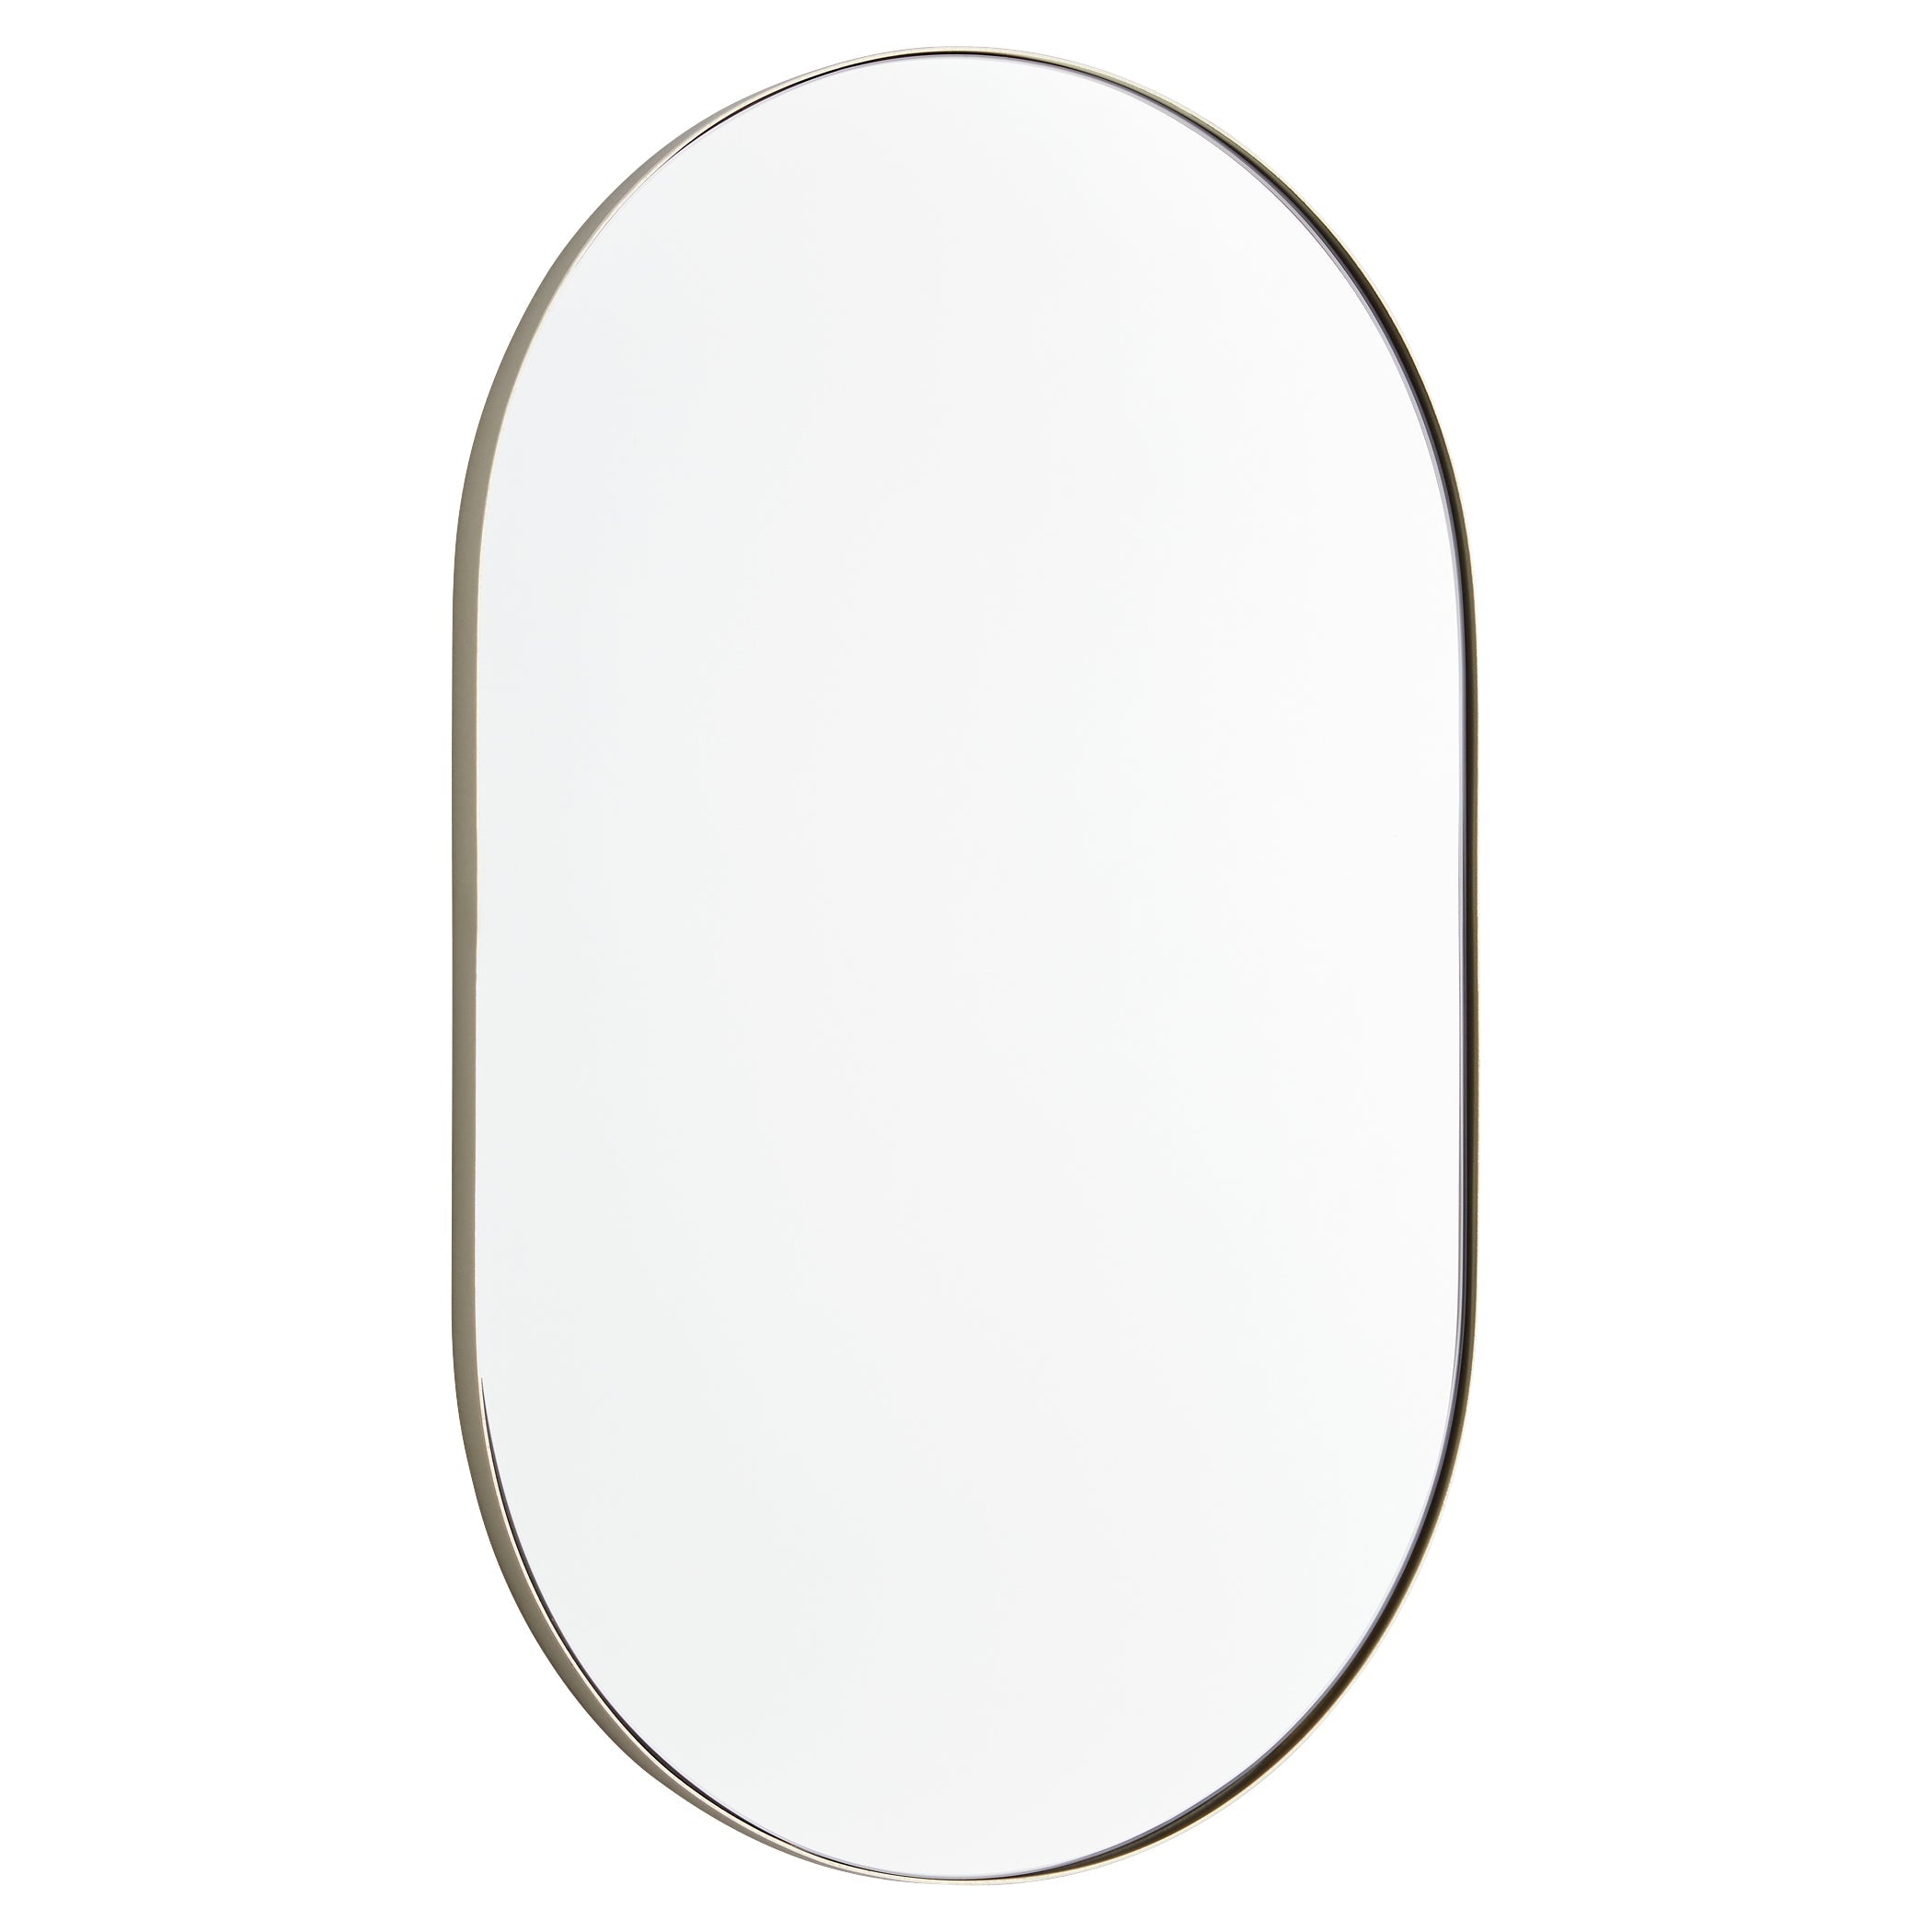 Quorum 15-2032-61 Mirror - Silver Finished